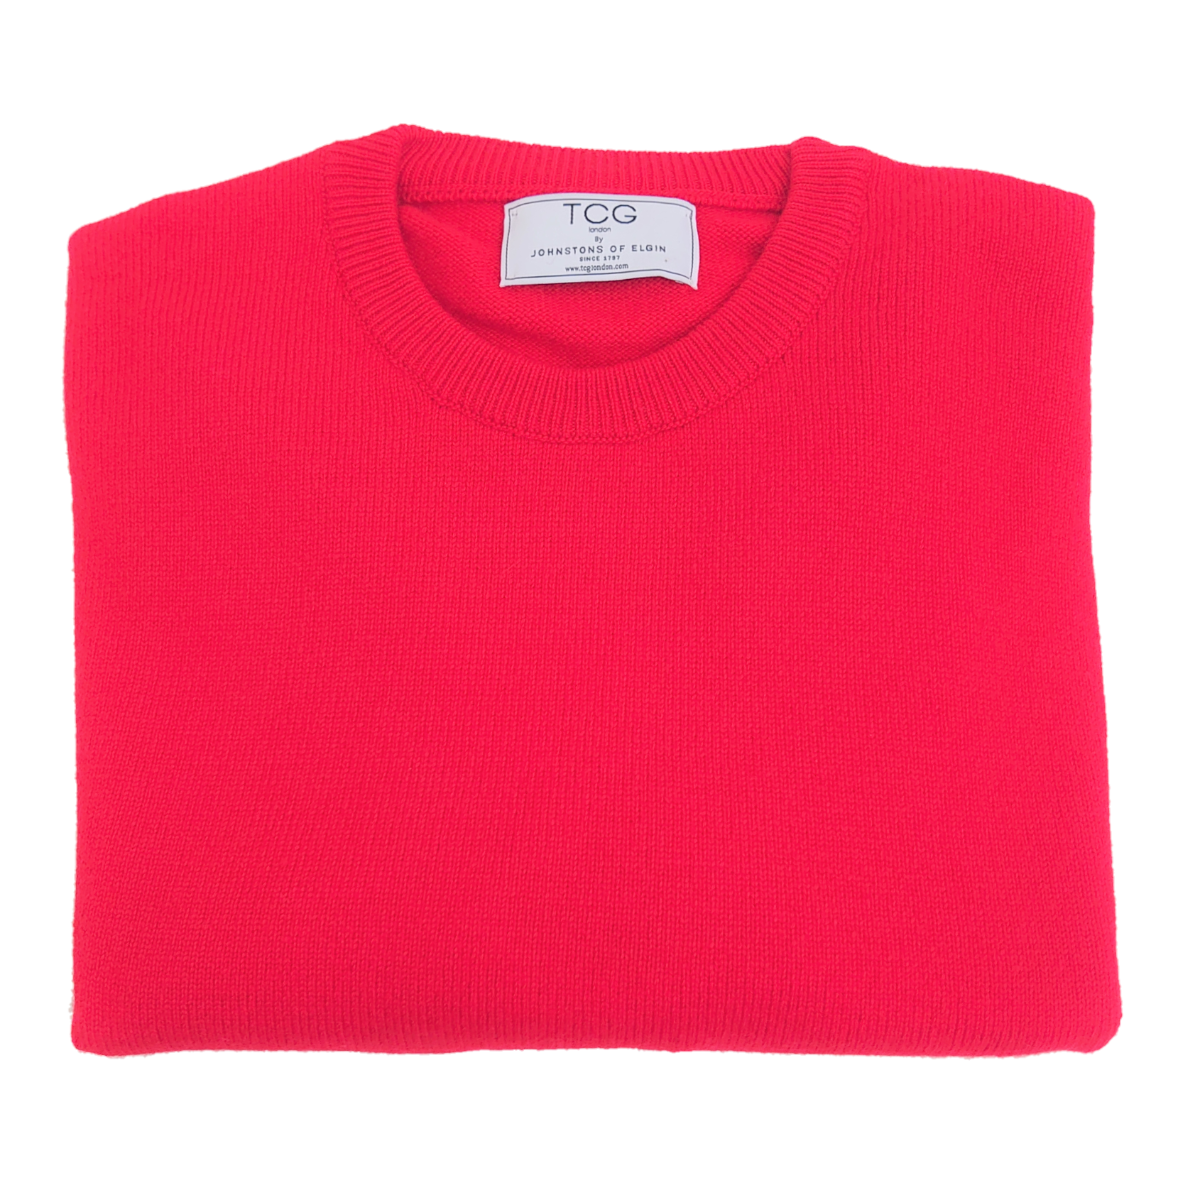 Men's Relaxed Fit Round Neck 100% Pure Cashmere Jumper - Red - M